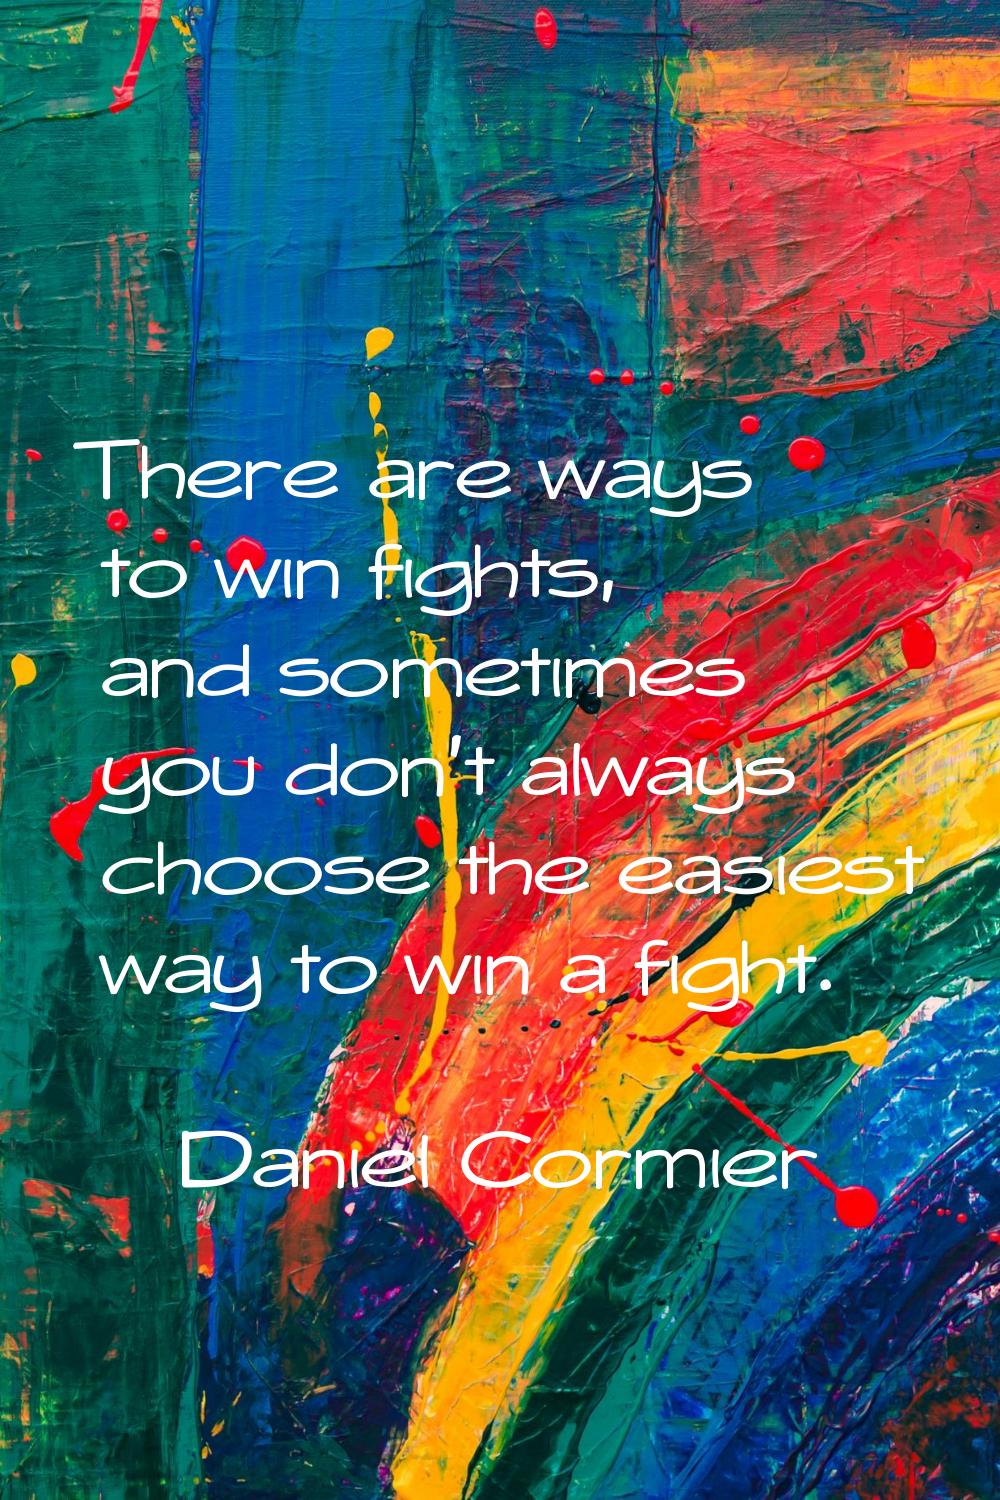 There are ways to win fights, and sometimes you don't always choose the easiest way to win a fight.